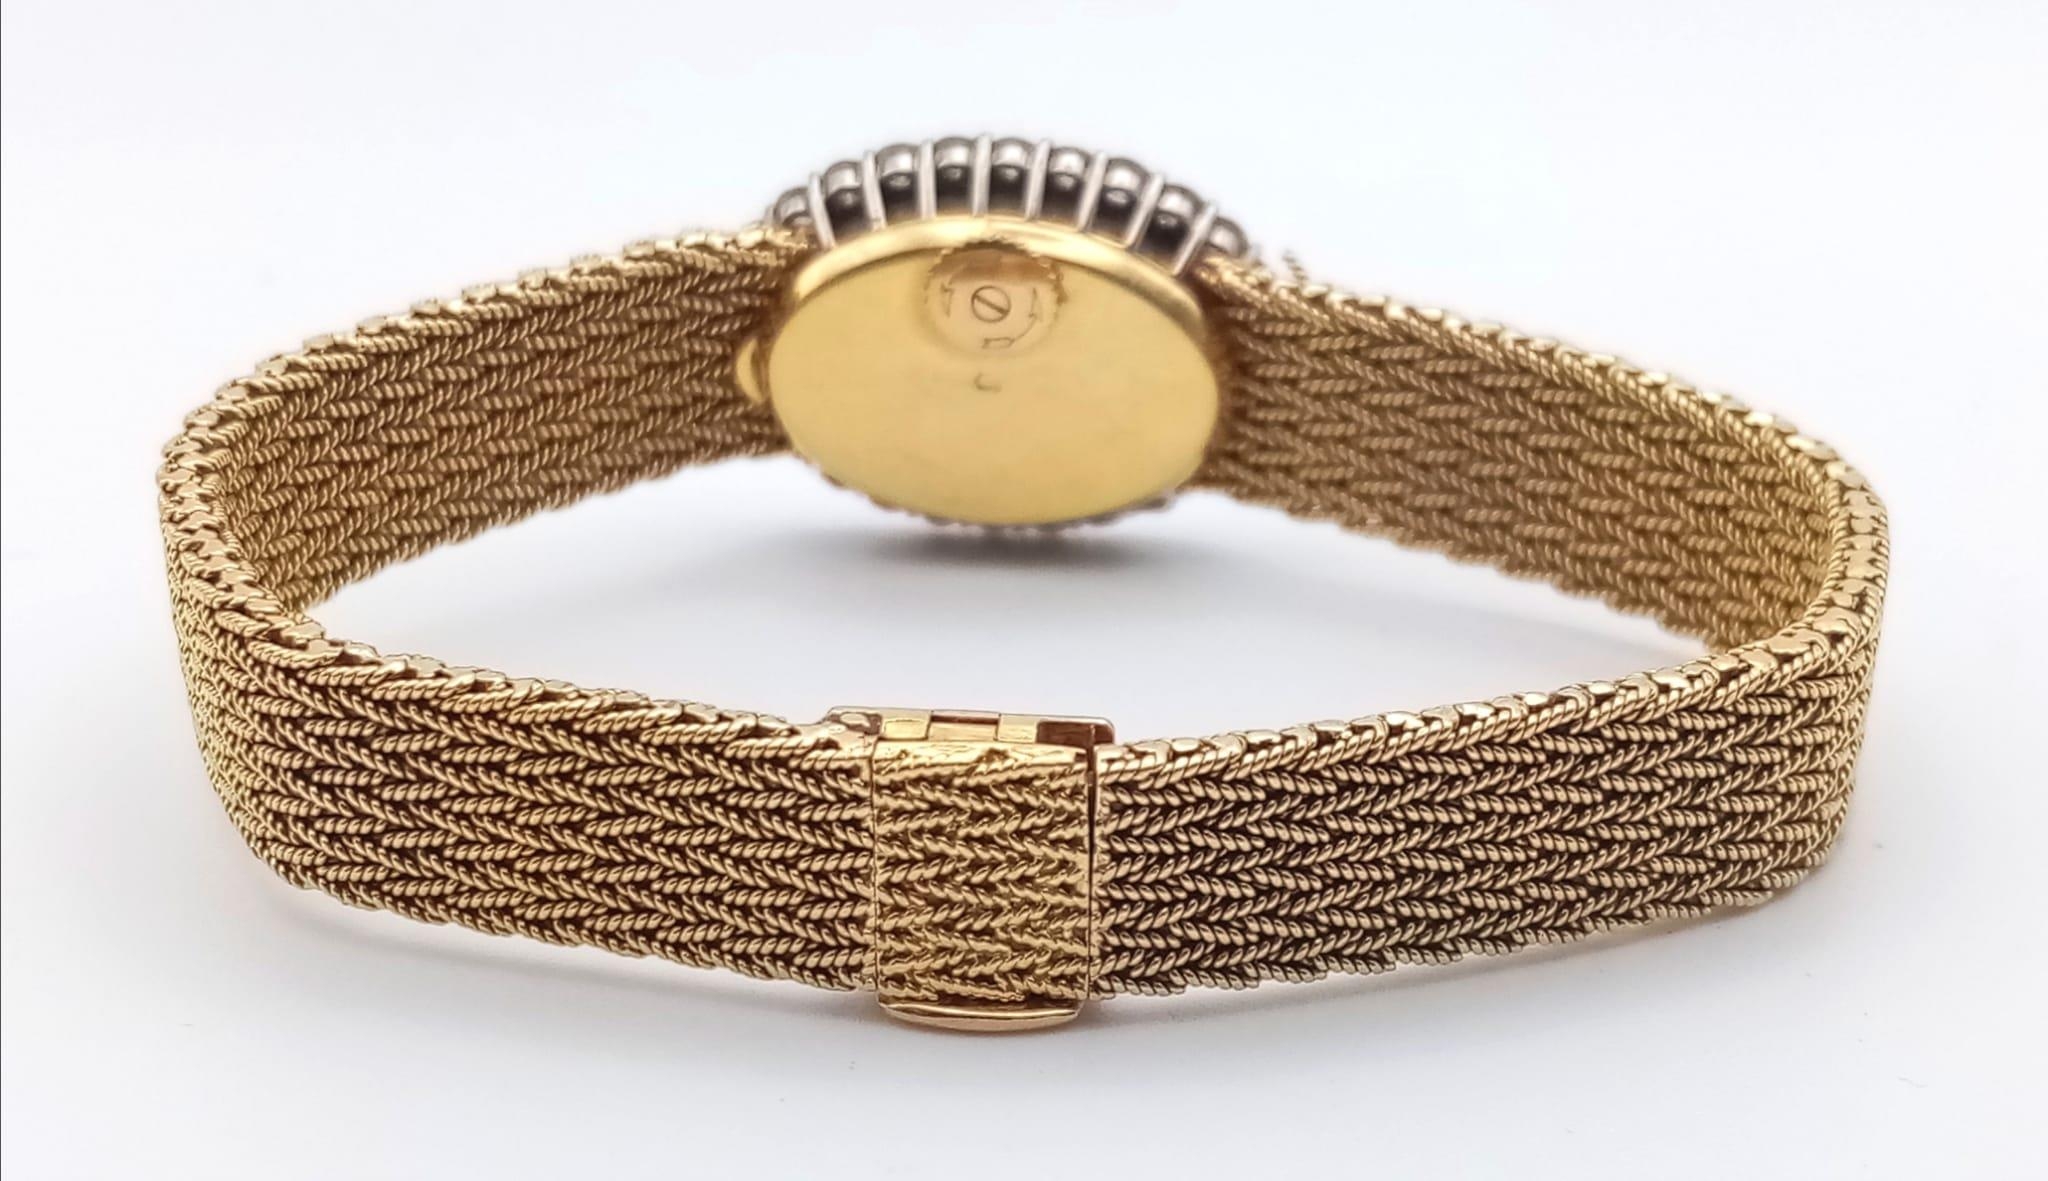 A Vacheron-Constantin 18K Yellow Gold and Diamond Ladies Watch. Gold bracelet and oval case - - Image 6 of 8